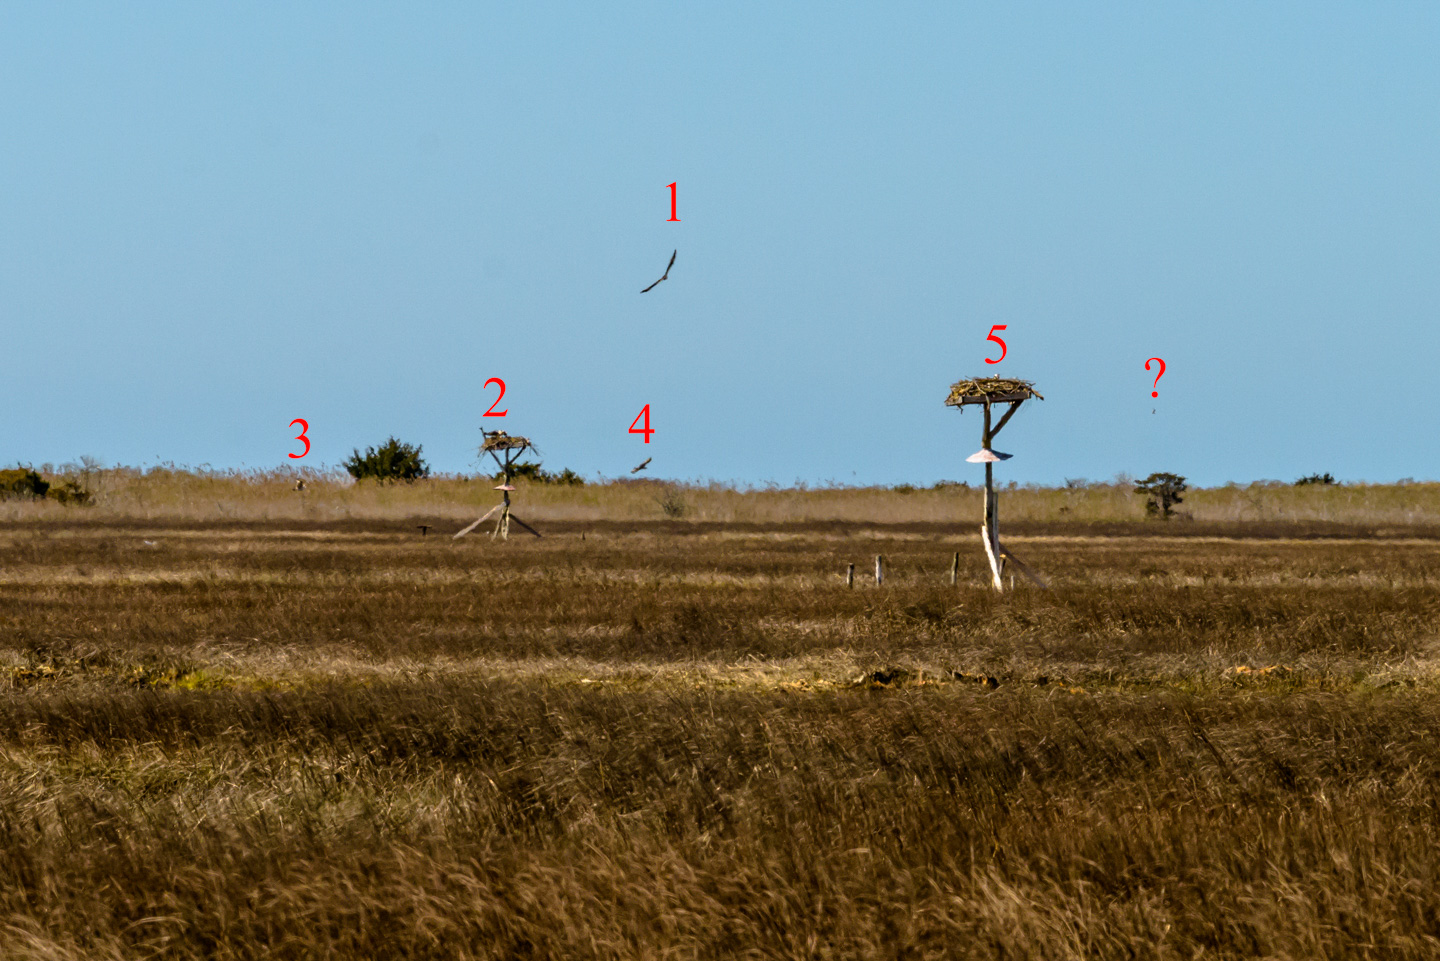 Five Osprey in a picture with numbers identifying where they are.